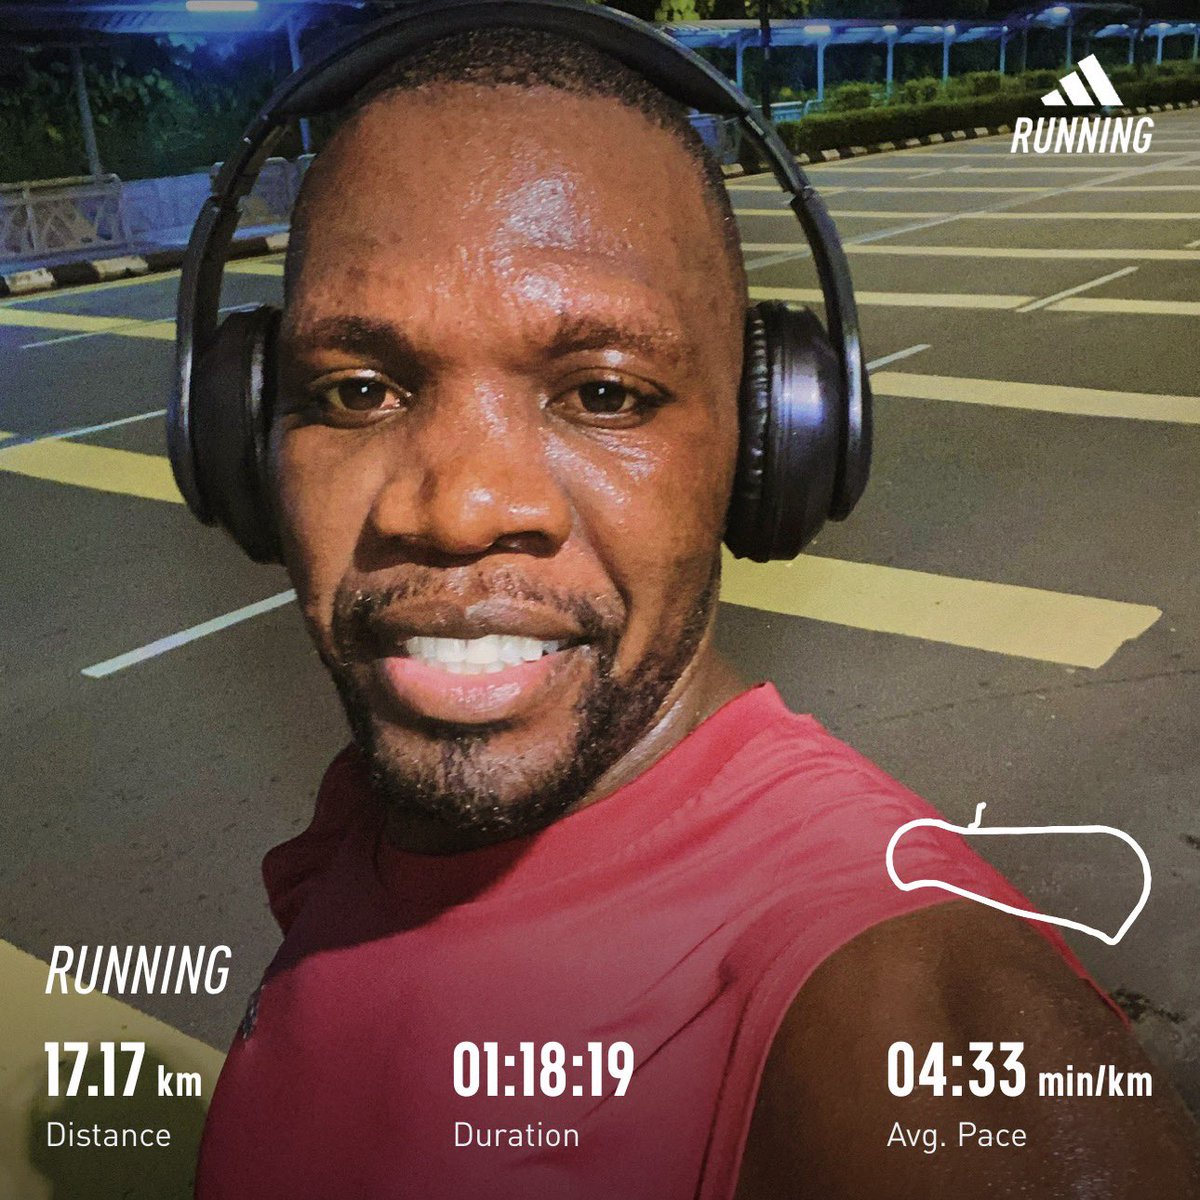 Switching your mindset from 'I hope I can do this' to 'I'm going to make this shit happen' is a real game changer.
#RunningWithSoleA
#runningwithtumisole
#runwitharthurk
#nikerunning
#adidasruntastic
#runaddicted 
#halfmarathon
#IPaintedMyRun 
#RunningWithLulubel
#Run2024